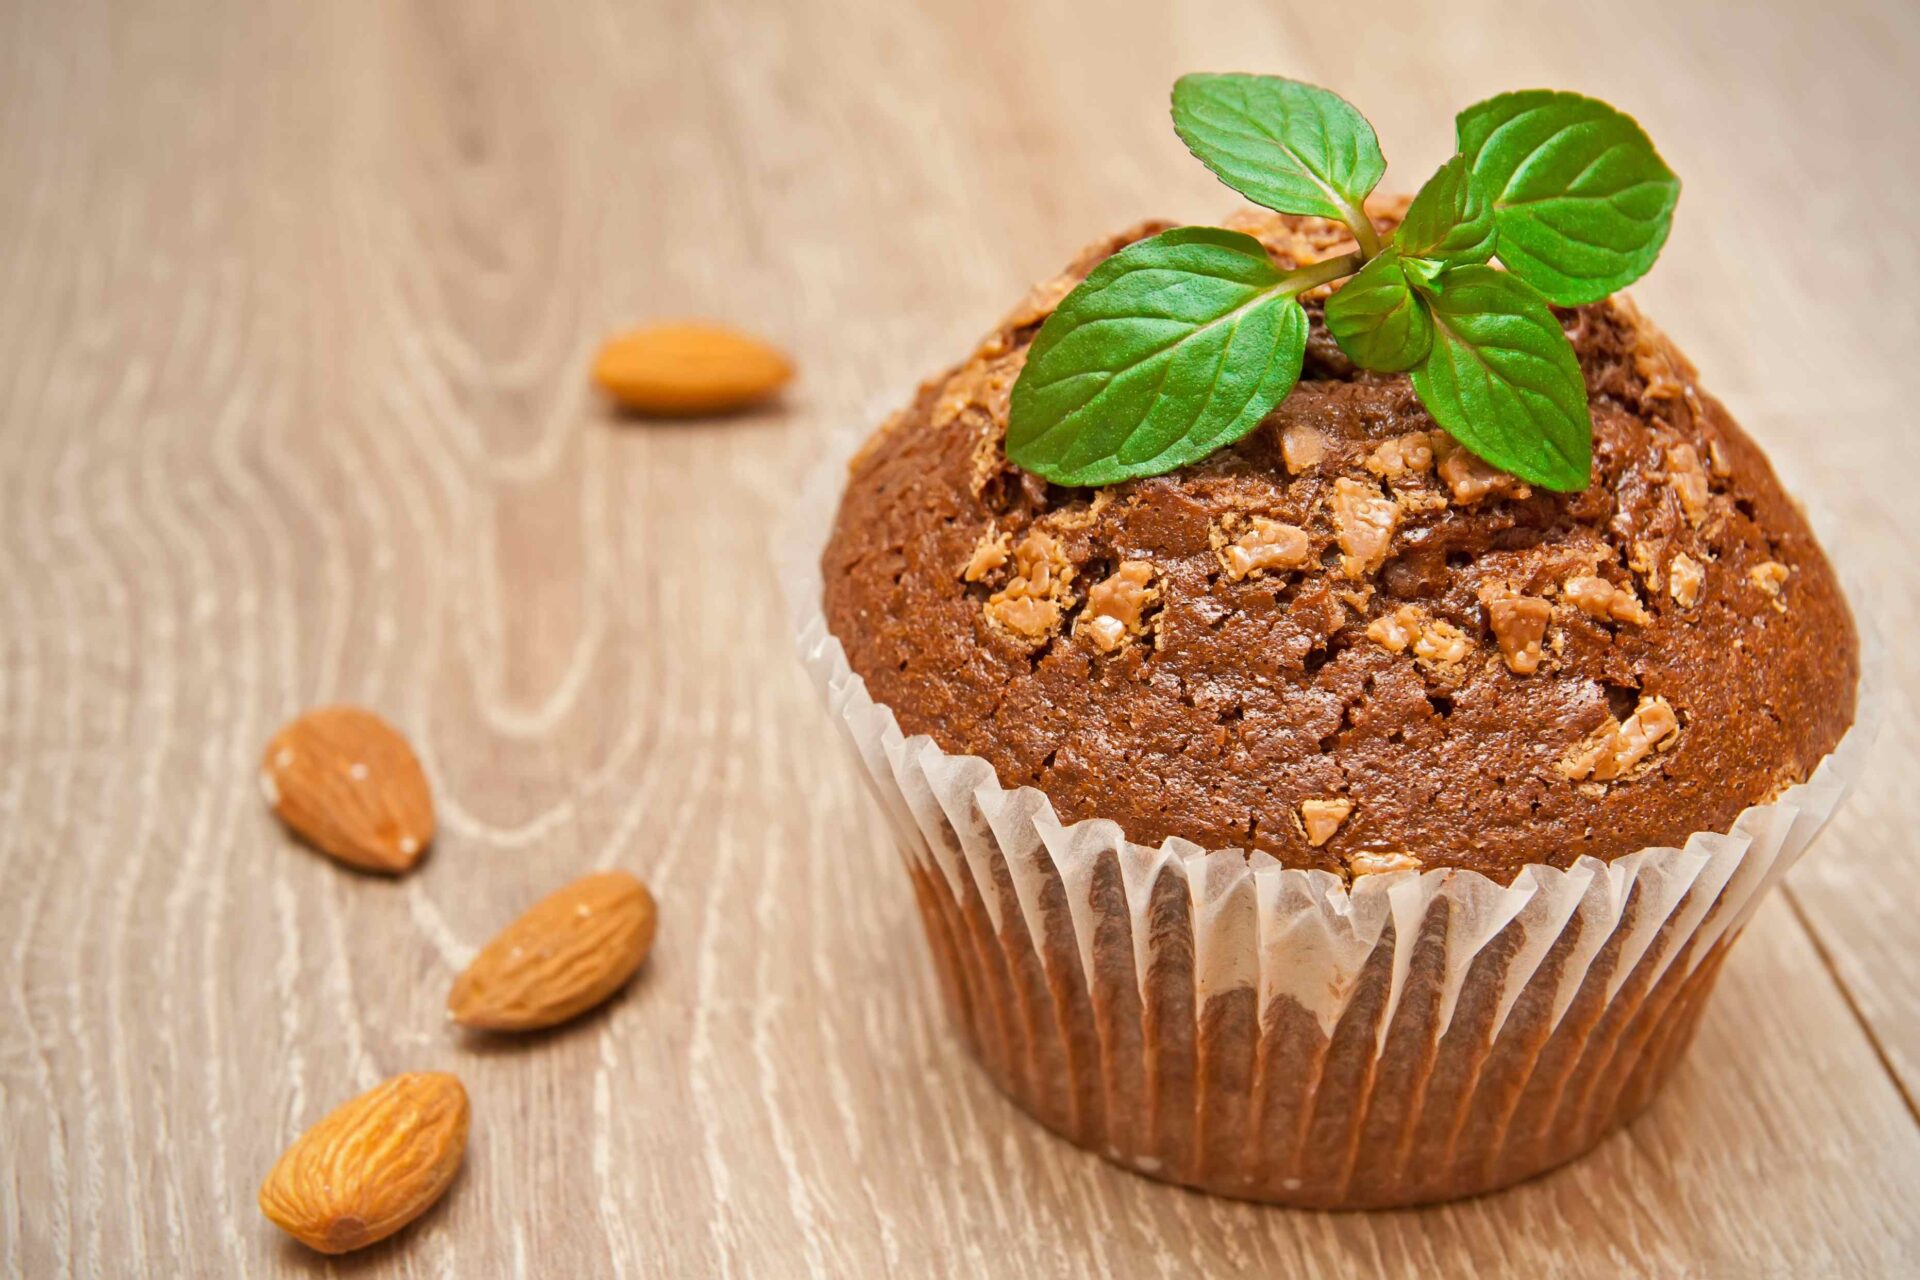 A Muffin Topped with Diced Almonds and Leafy Garnish - Bakery Toppings